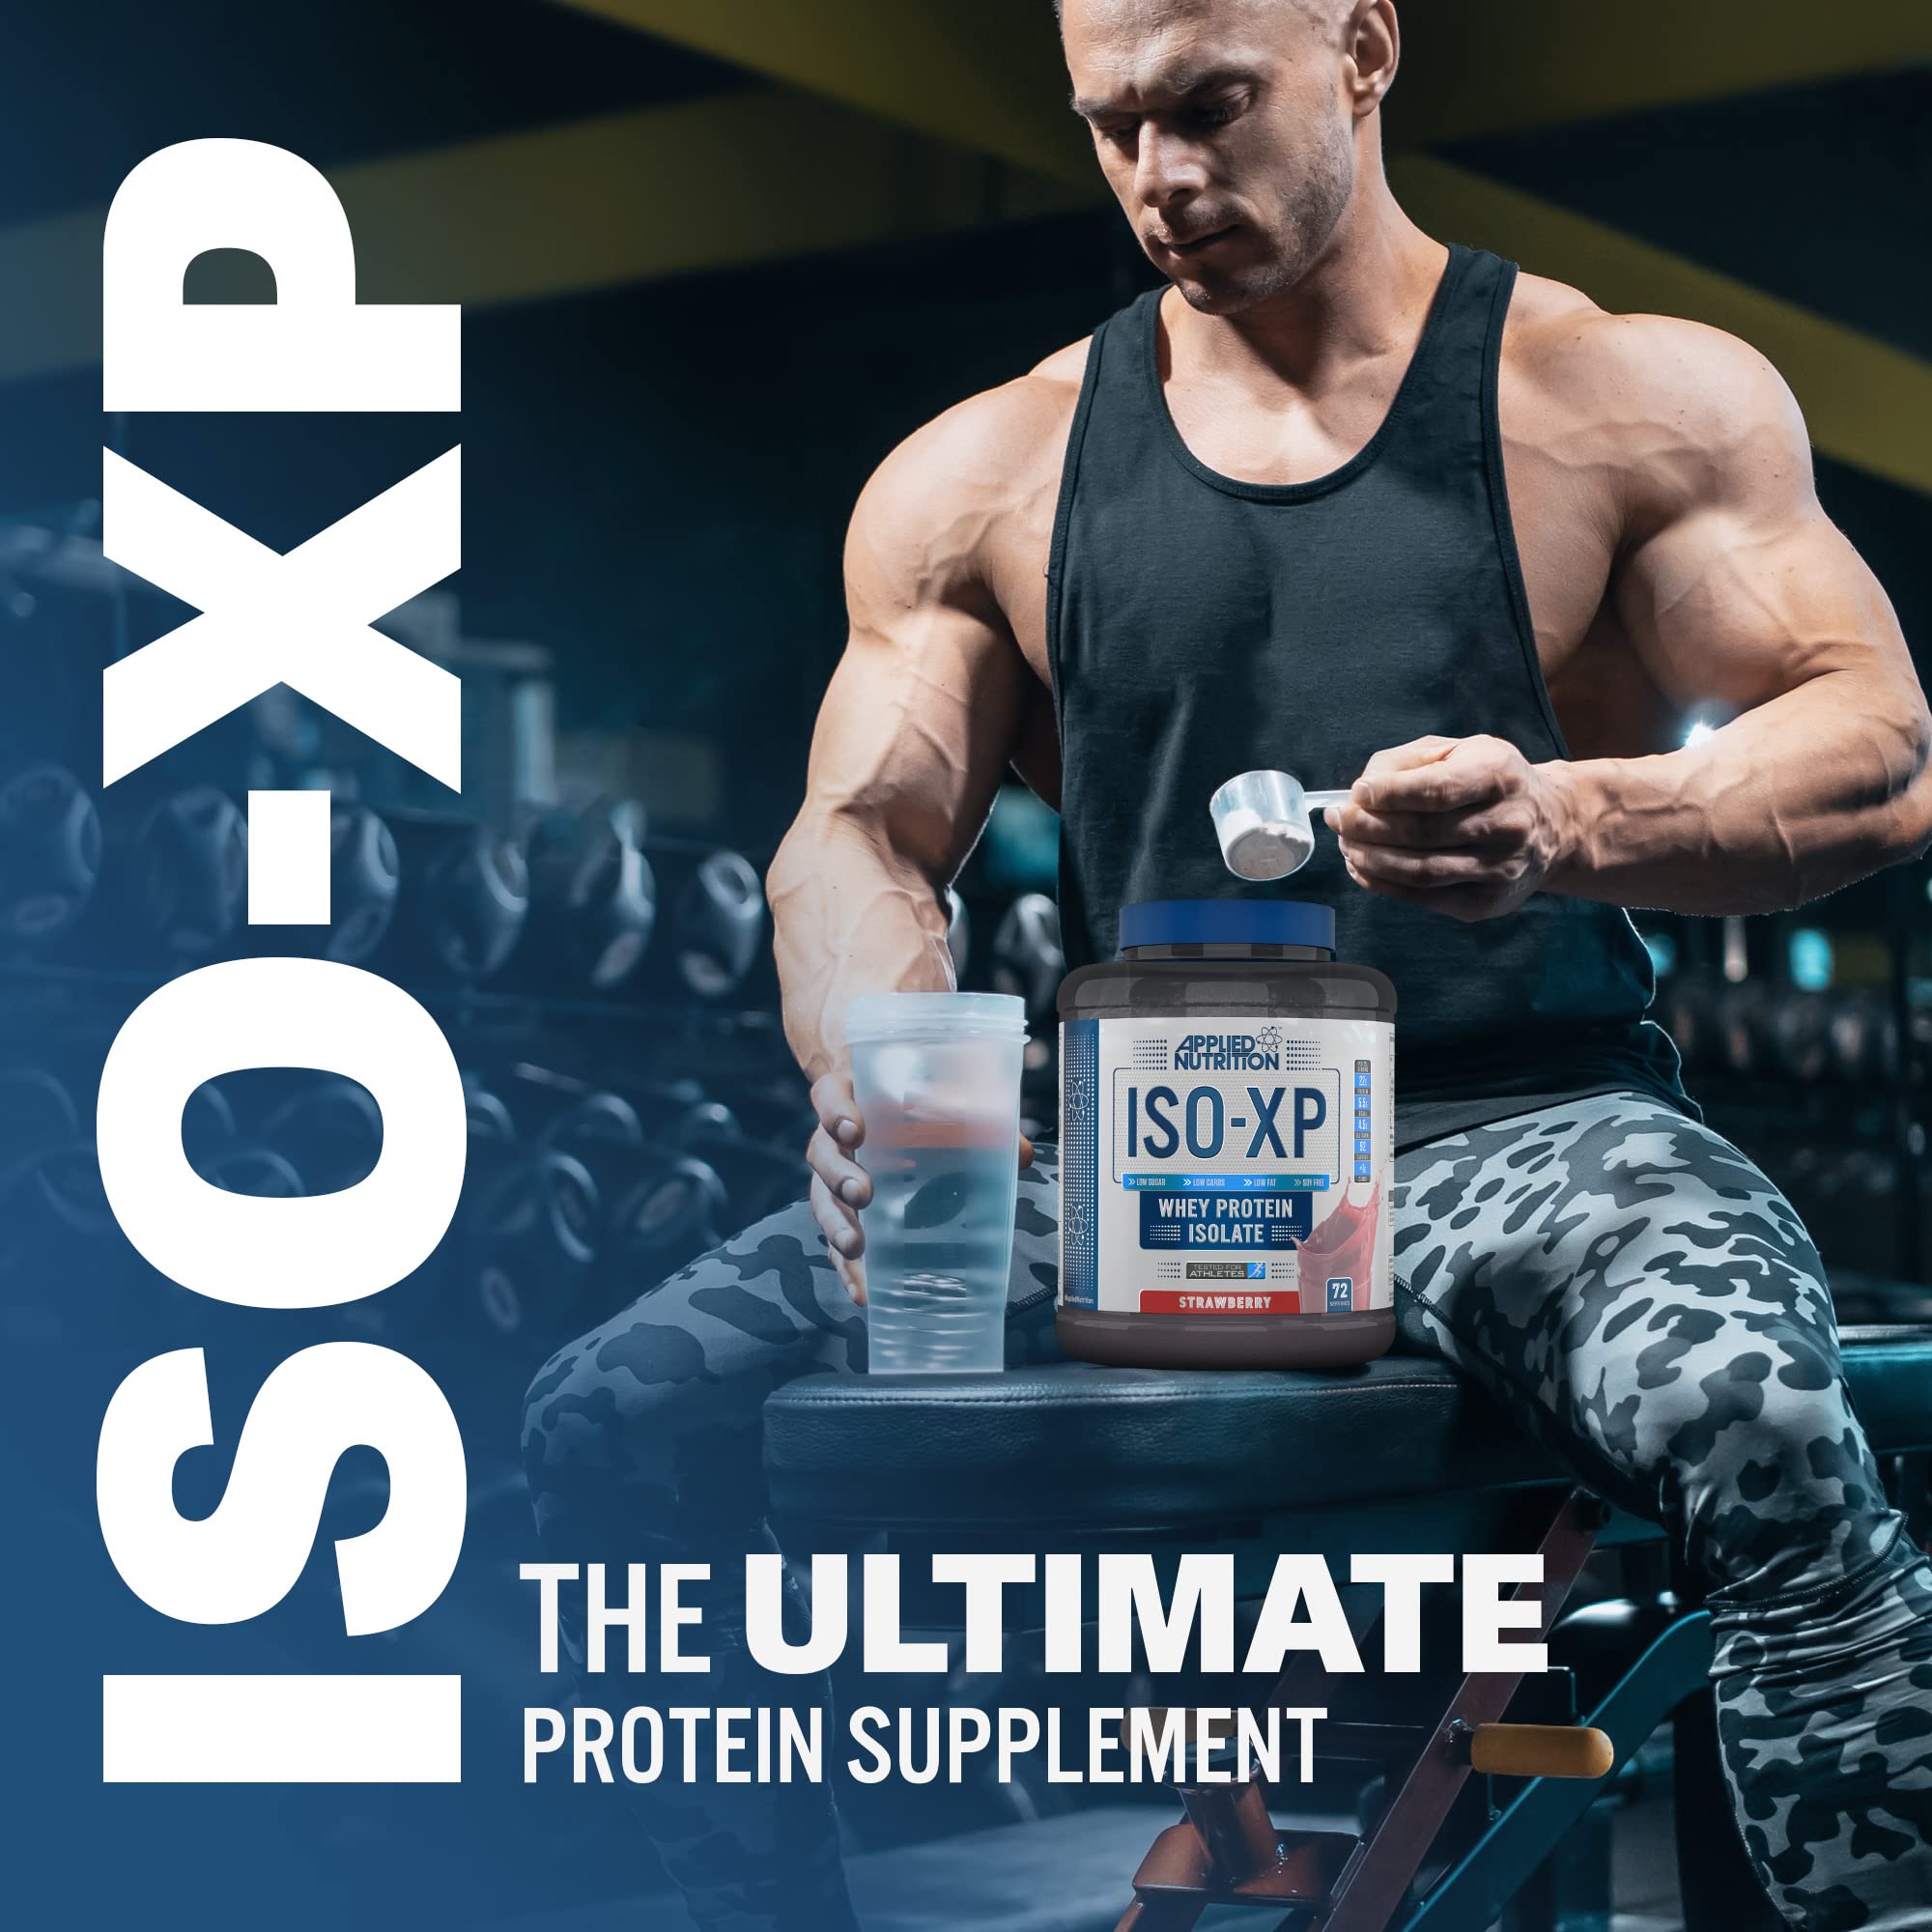 Applied Nutrition Iso-XP Molkeproteinisolate Isolate Eiweiß Protein